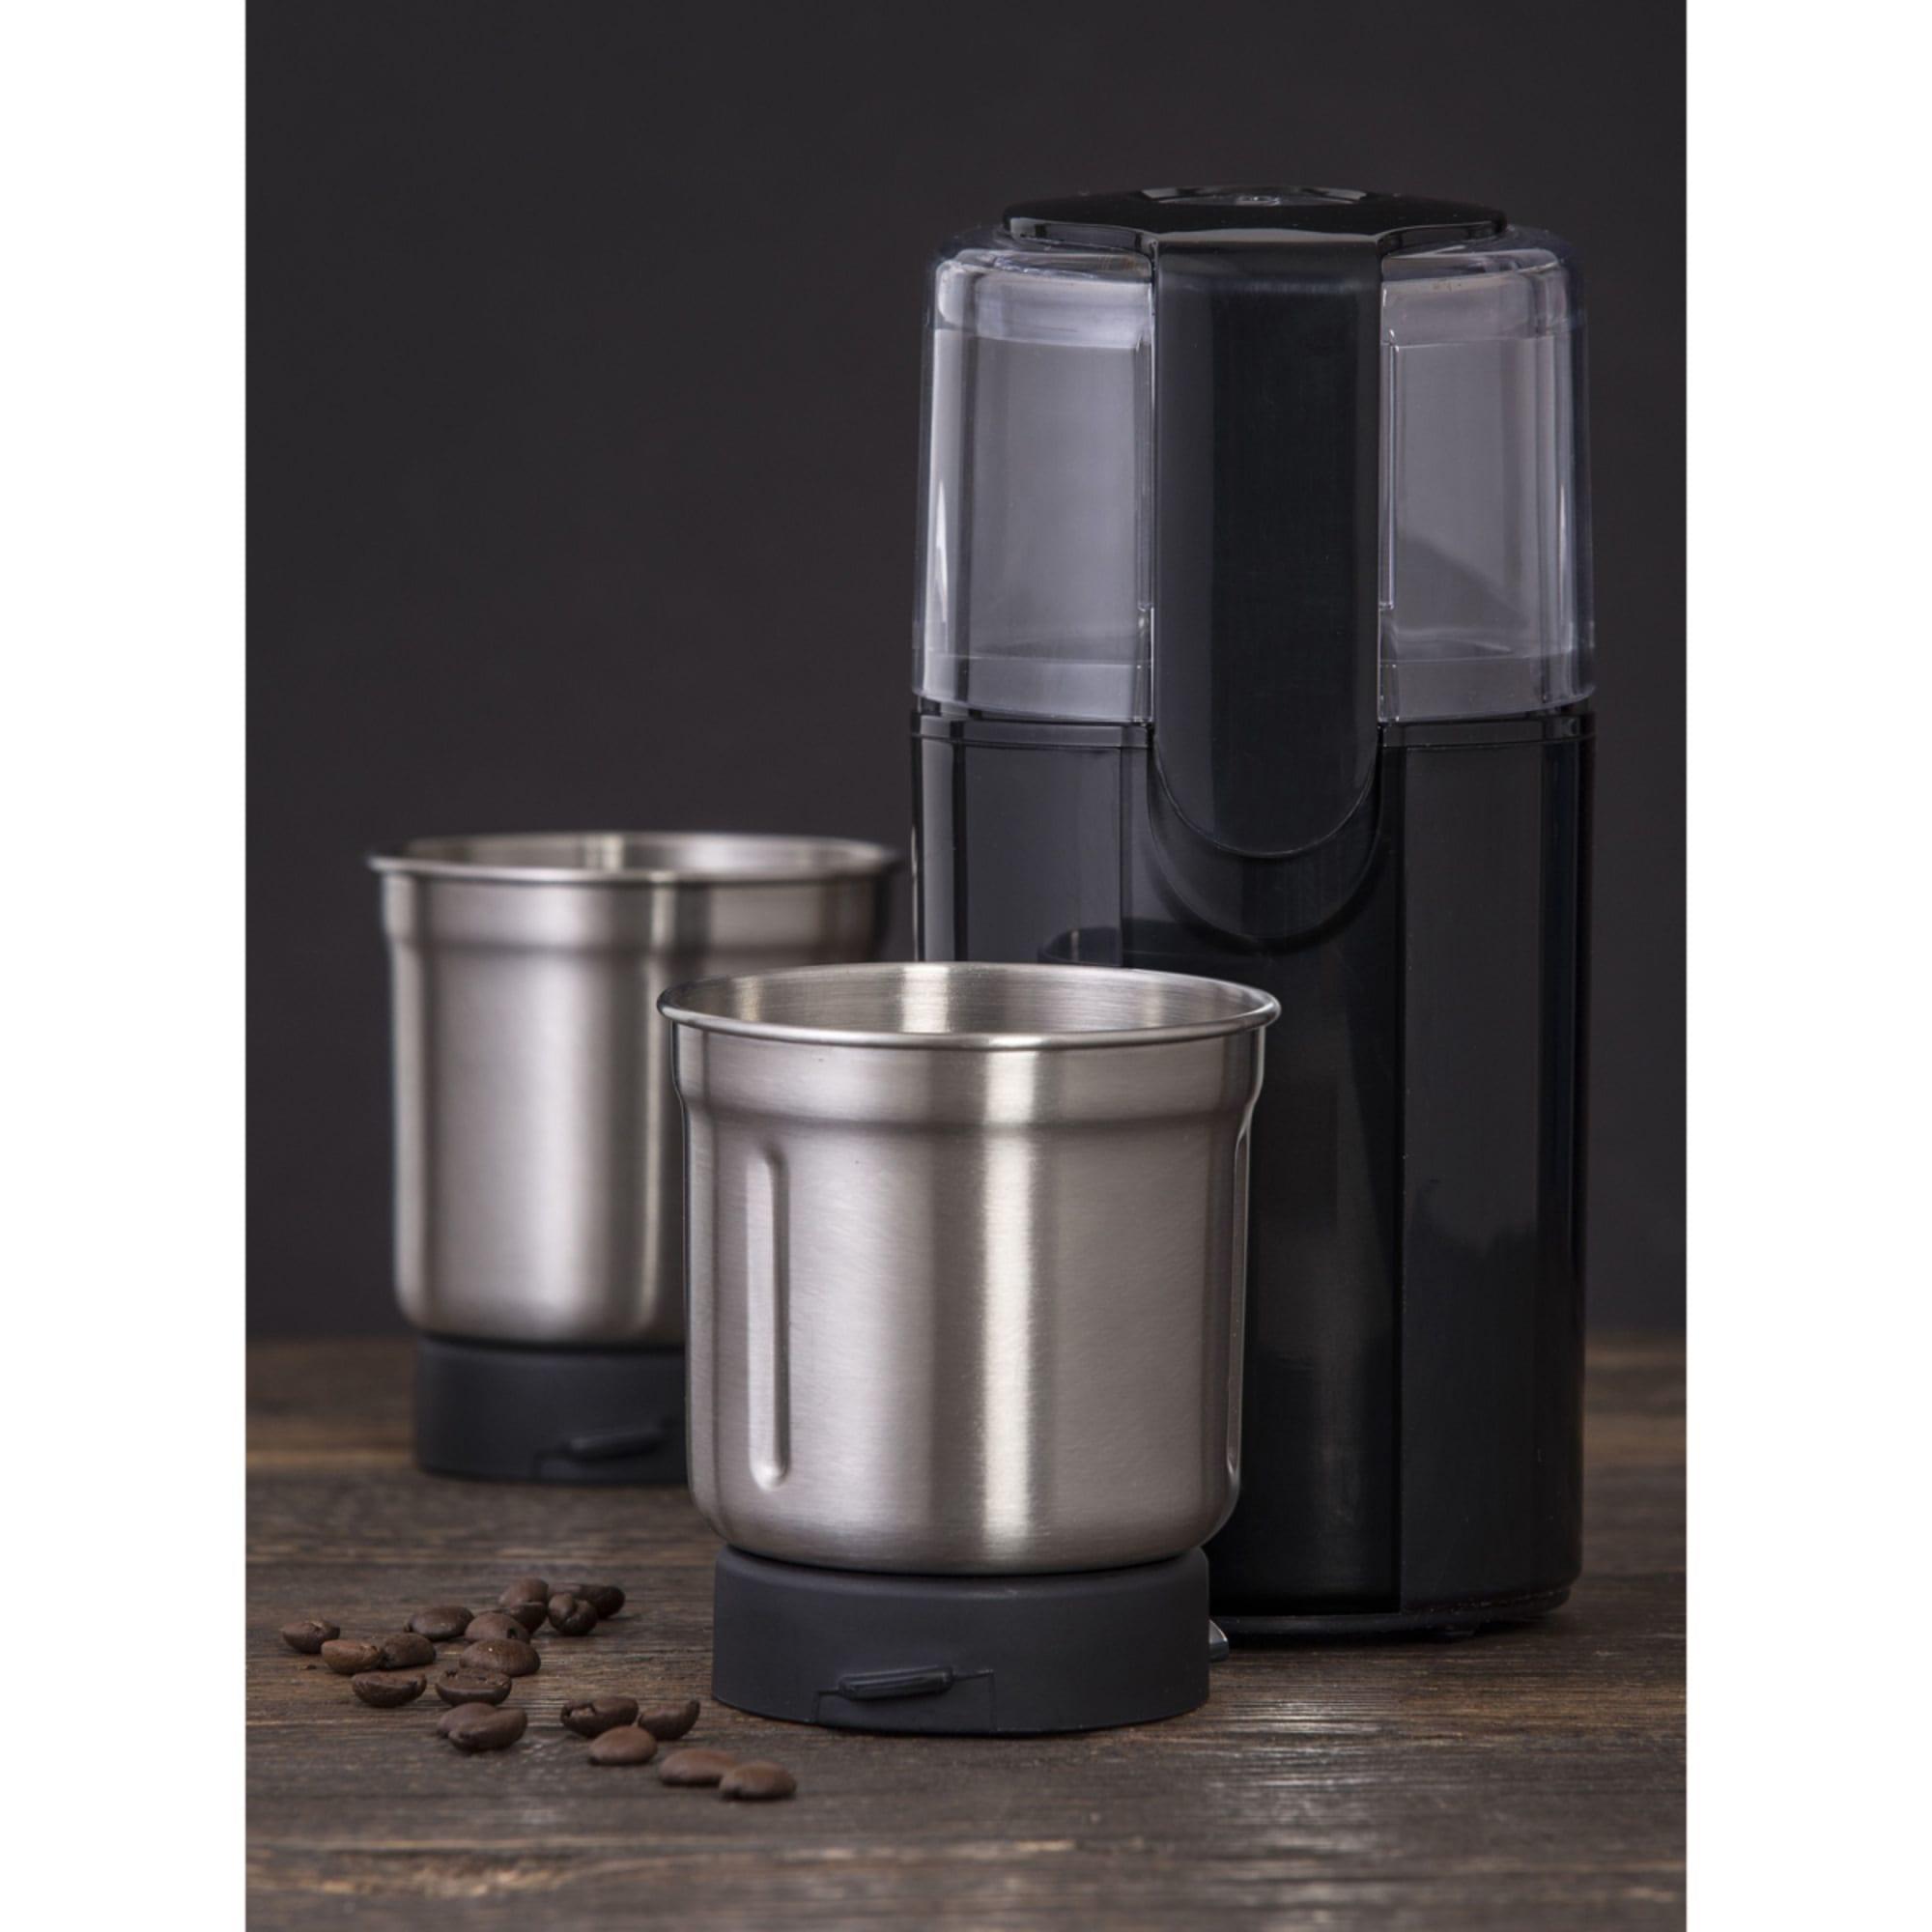 Leaf & Bean 2 in 1 Electric Coffee and Spice Grinder Image 3